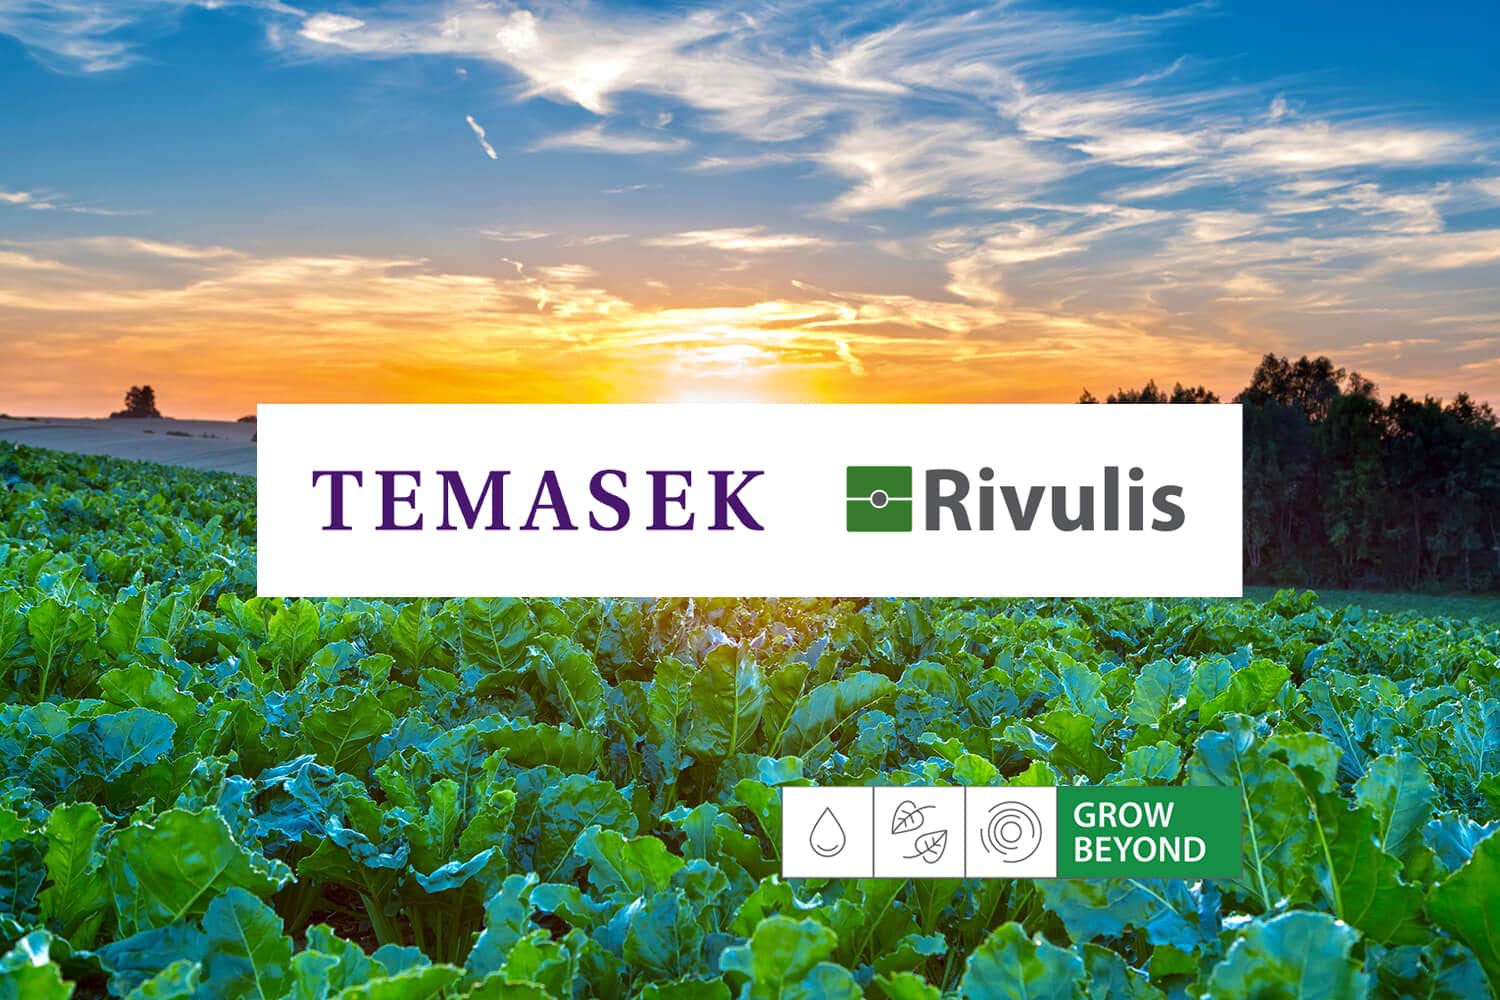 Rivulis announces completion of acquisition by Temasek